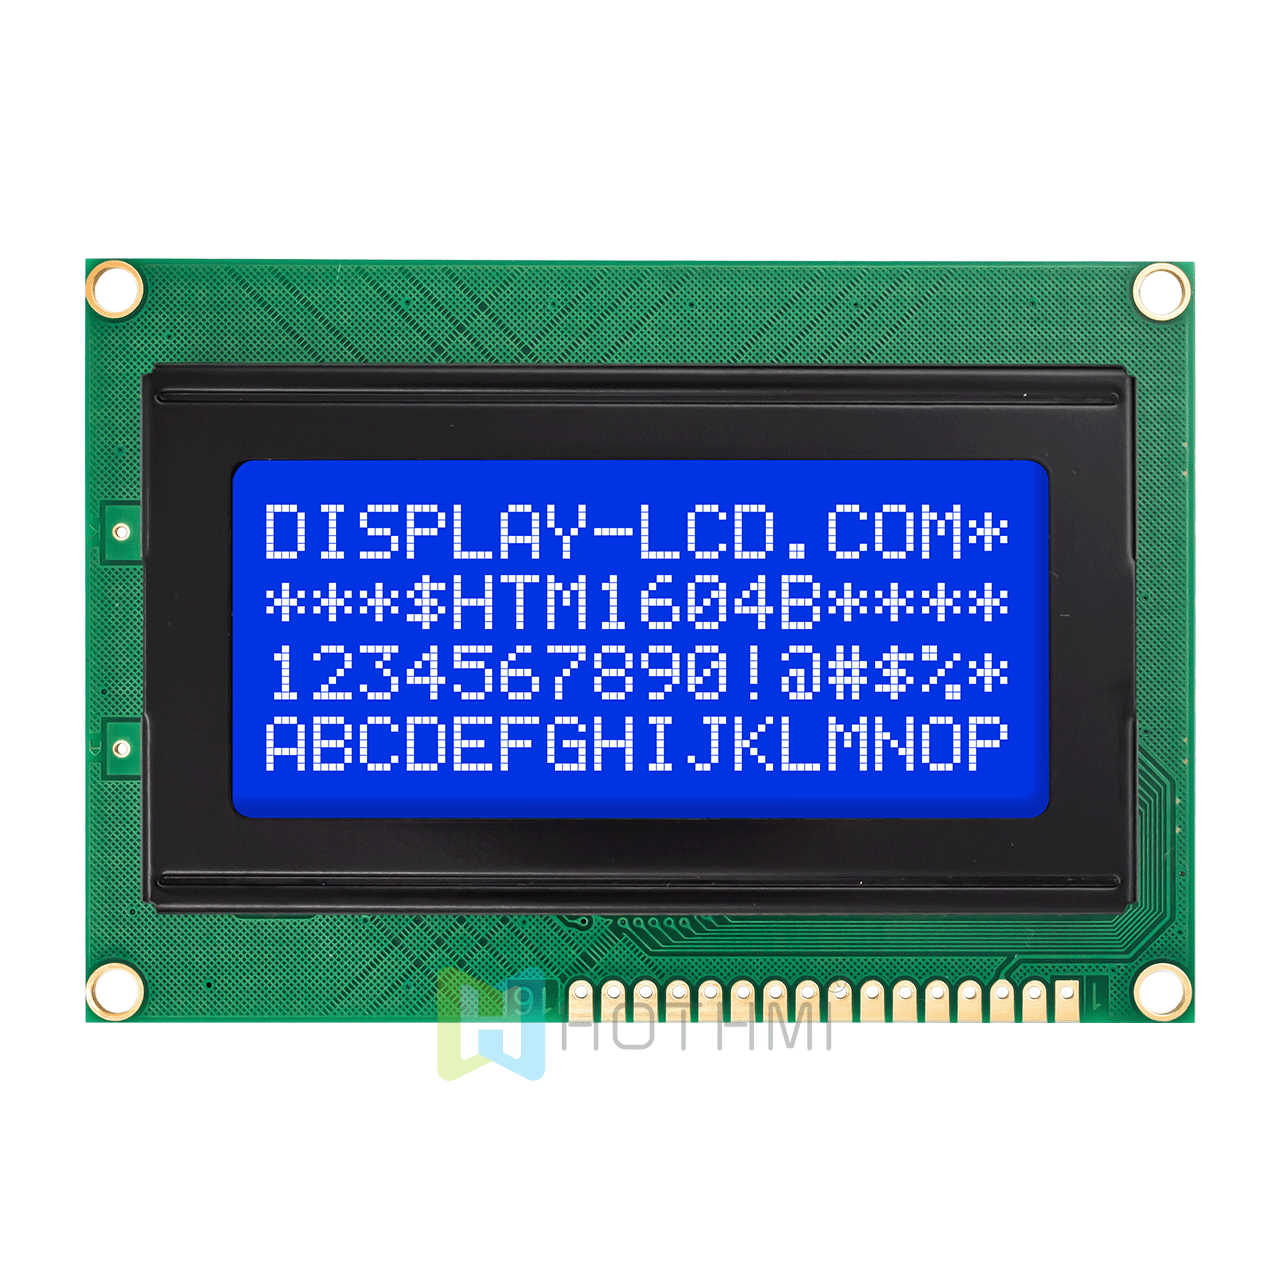 4x16 character LCD Module | STN(-) white side backlit monochrome display | Arduino | MCU interface | ST7066U controller | Total transflective | White text on blue background